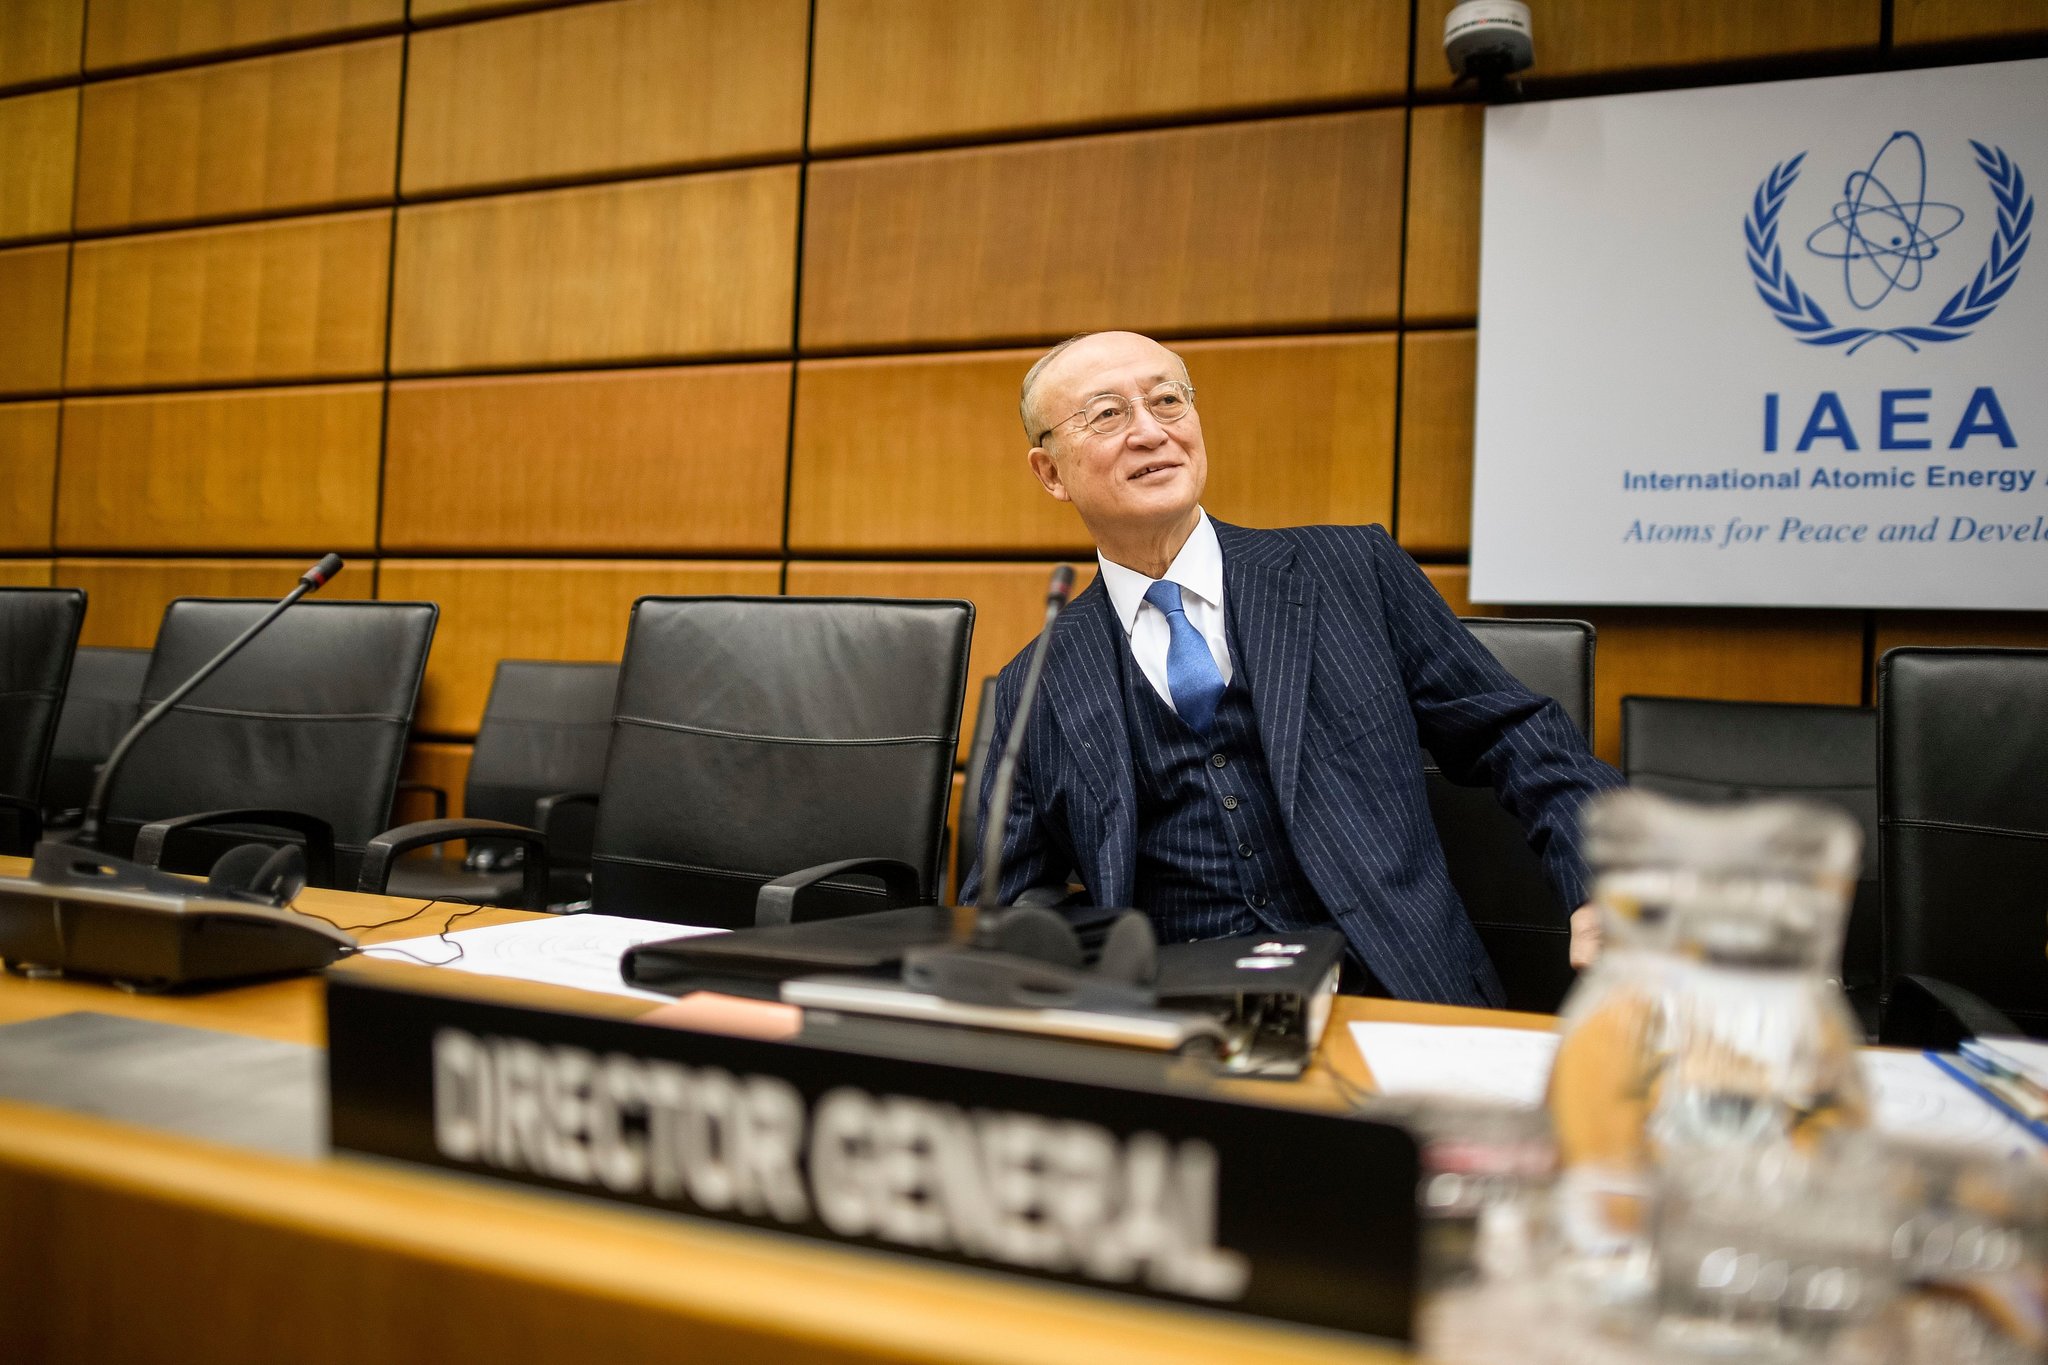 Yukiya Amano, Head of the I.A.E.A. Nuclear Watchdog Group Dies at 72 -Yukiya Amano in Vienna in November. Before his death, he was apparently preparing to step down as the head of the International Atomic Energy Agency.CreditCreditChristian Bruna/EPA, via Shutterstock